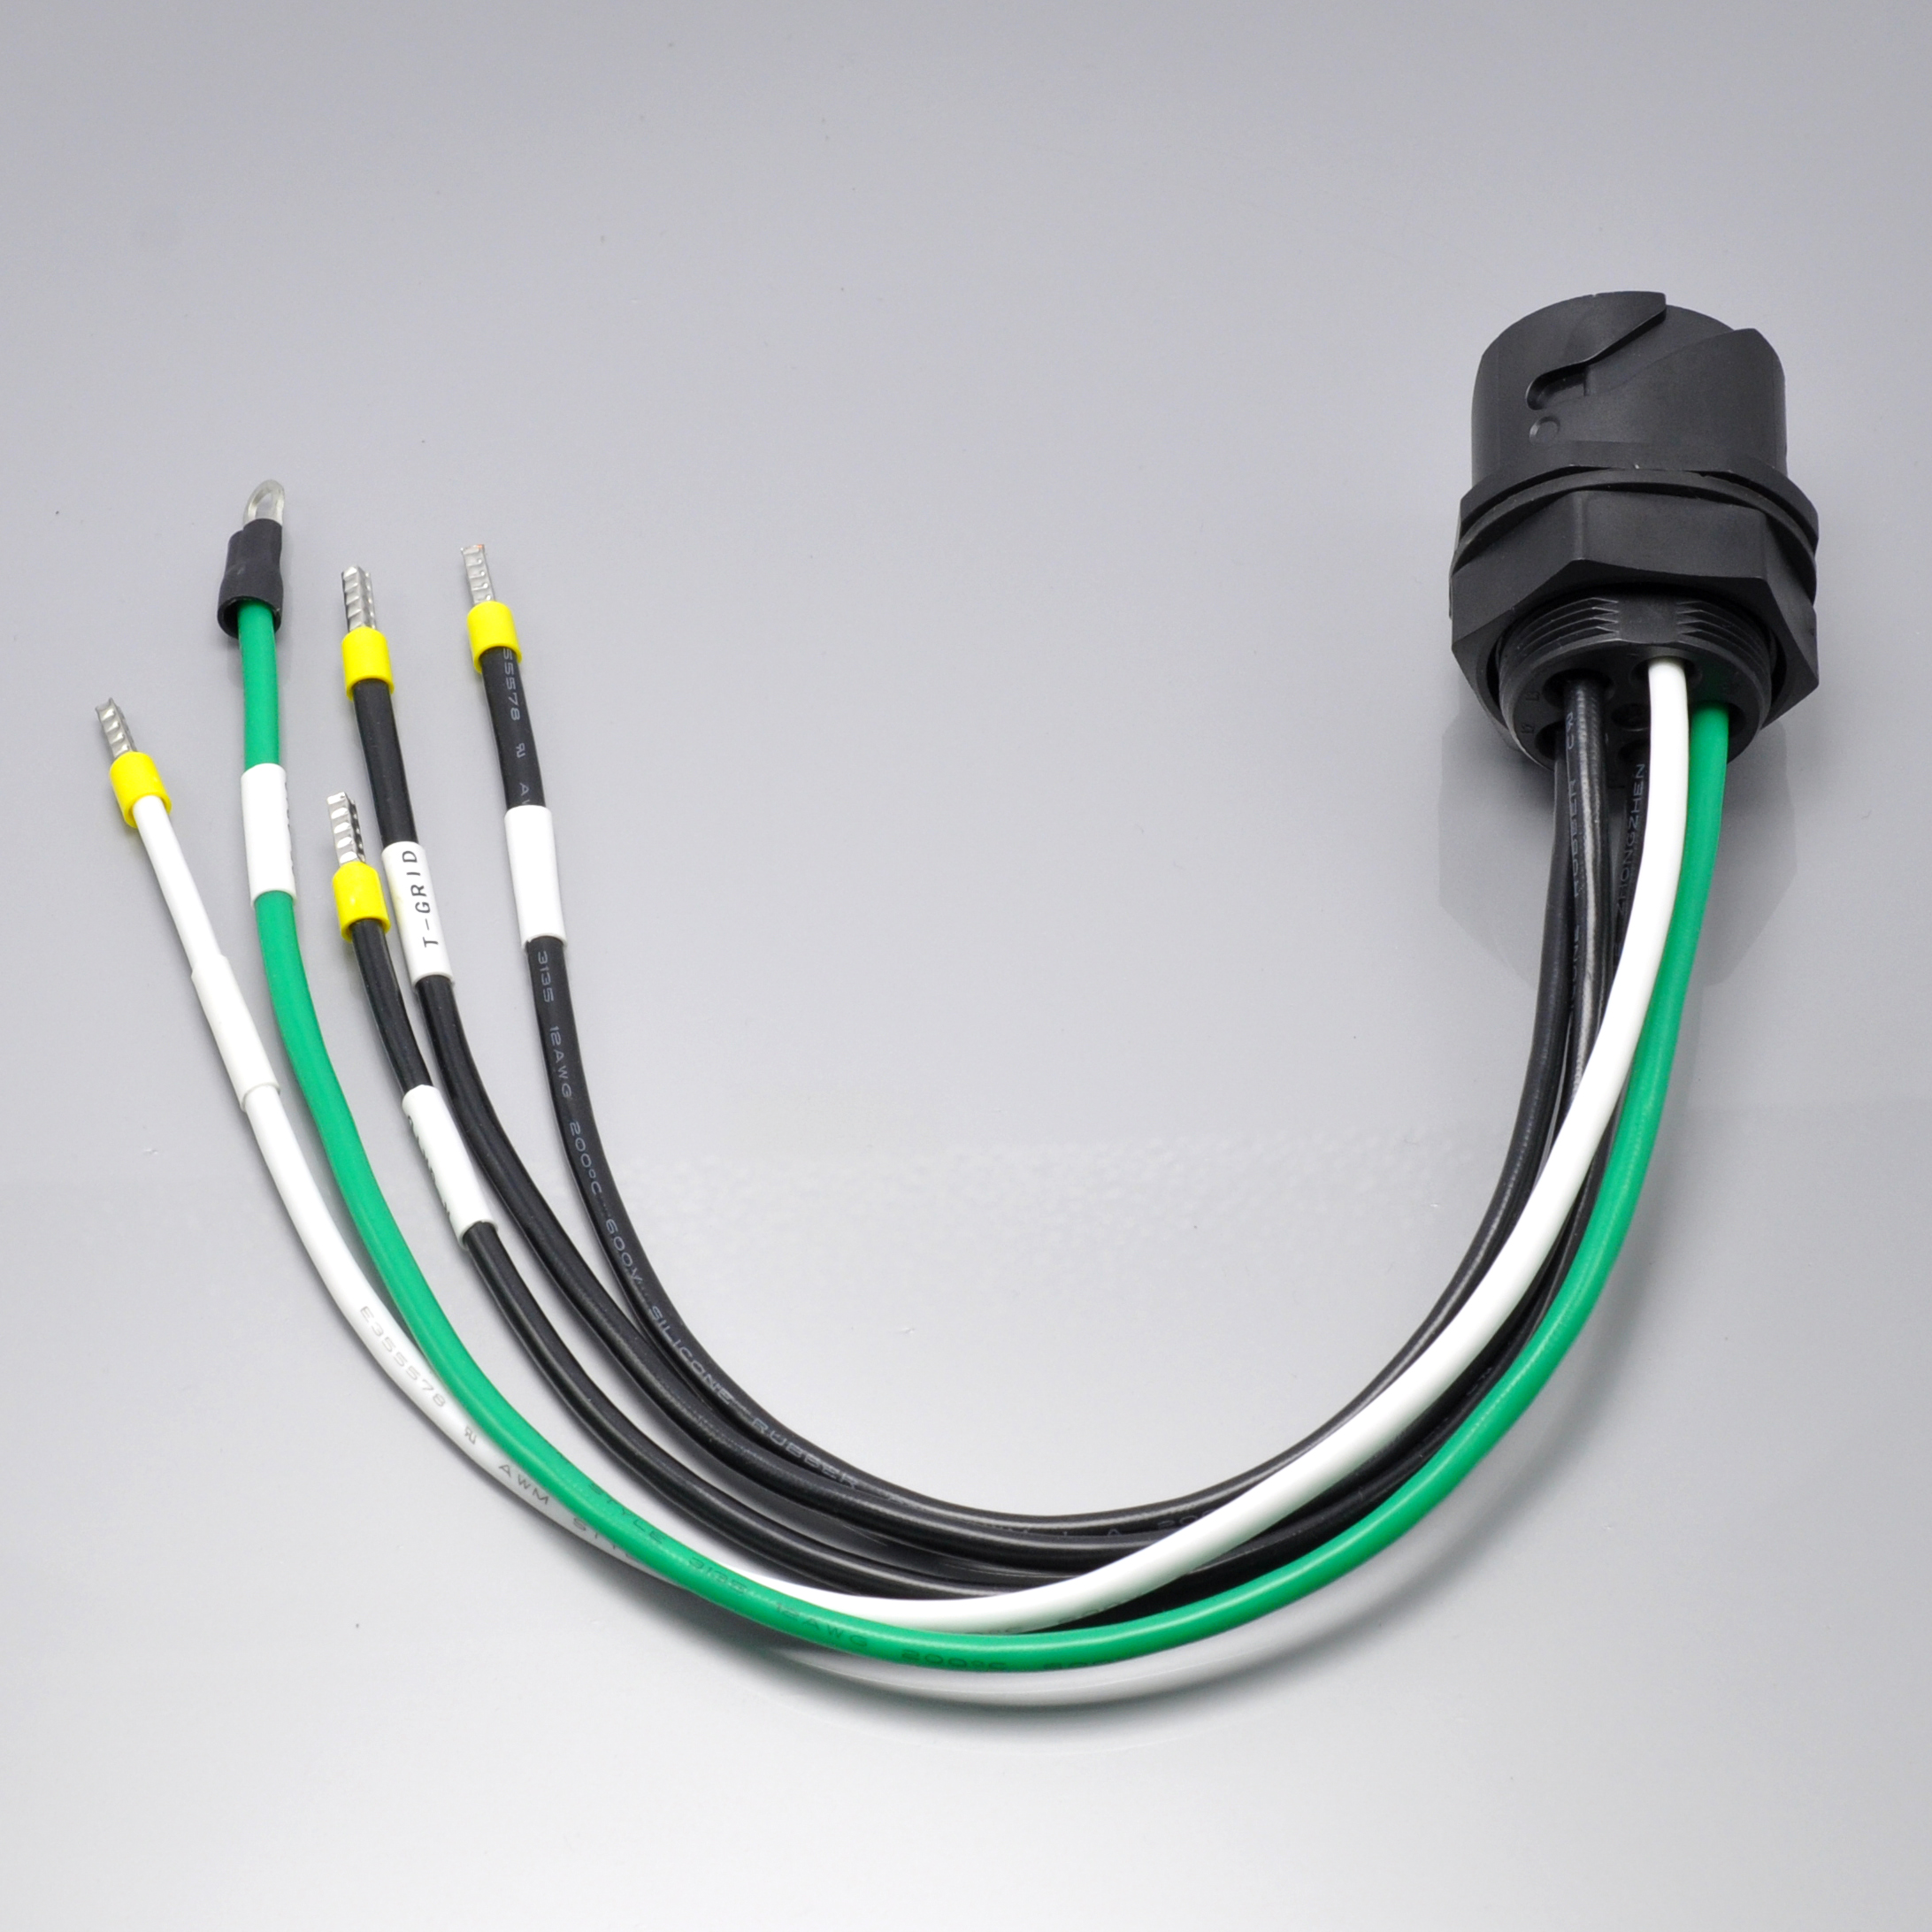 Wide Application of Chinese Wire-to-Board Connectors in Different Fields